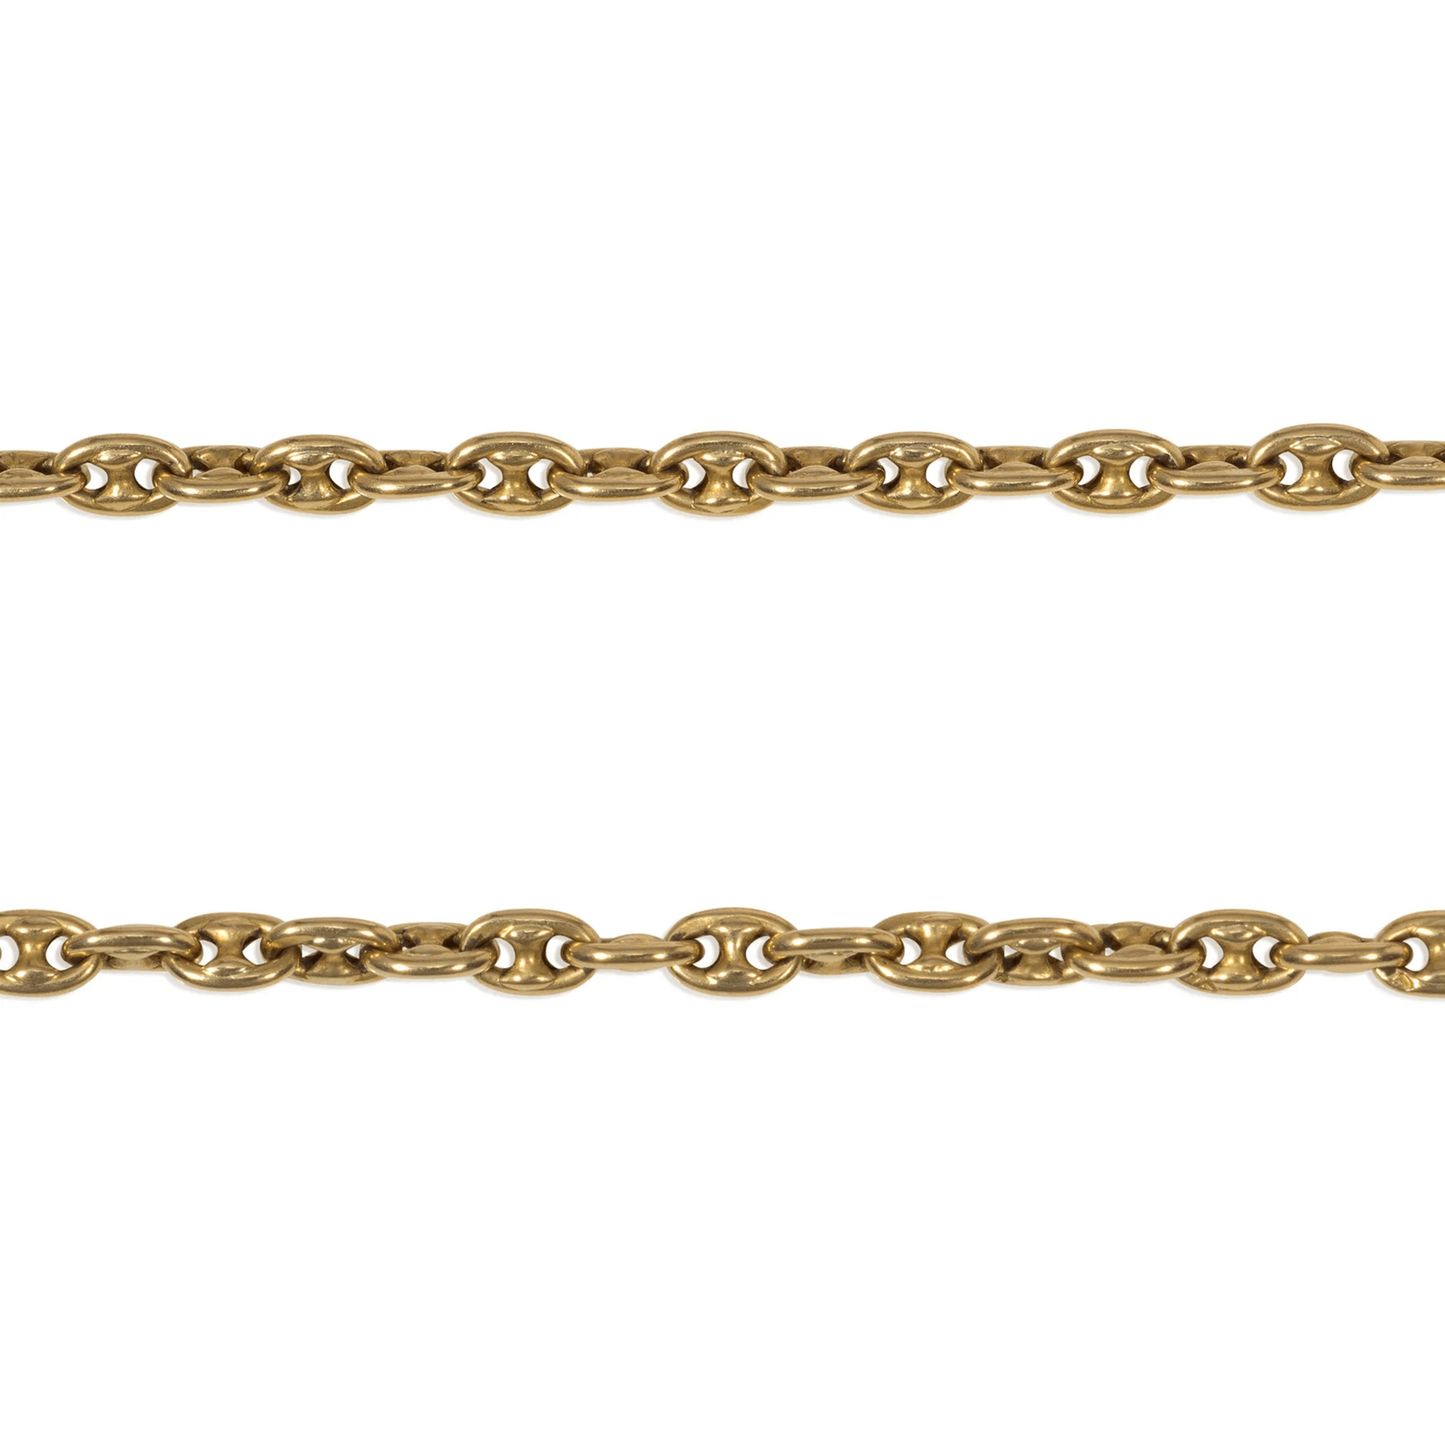 Victorian 18KT Yellow Gold Necklace close-up details